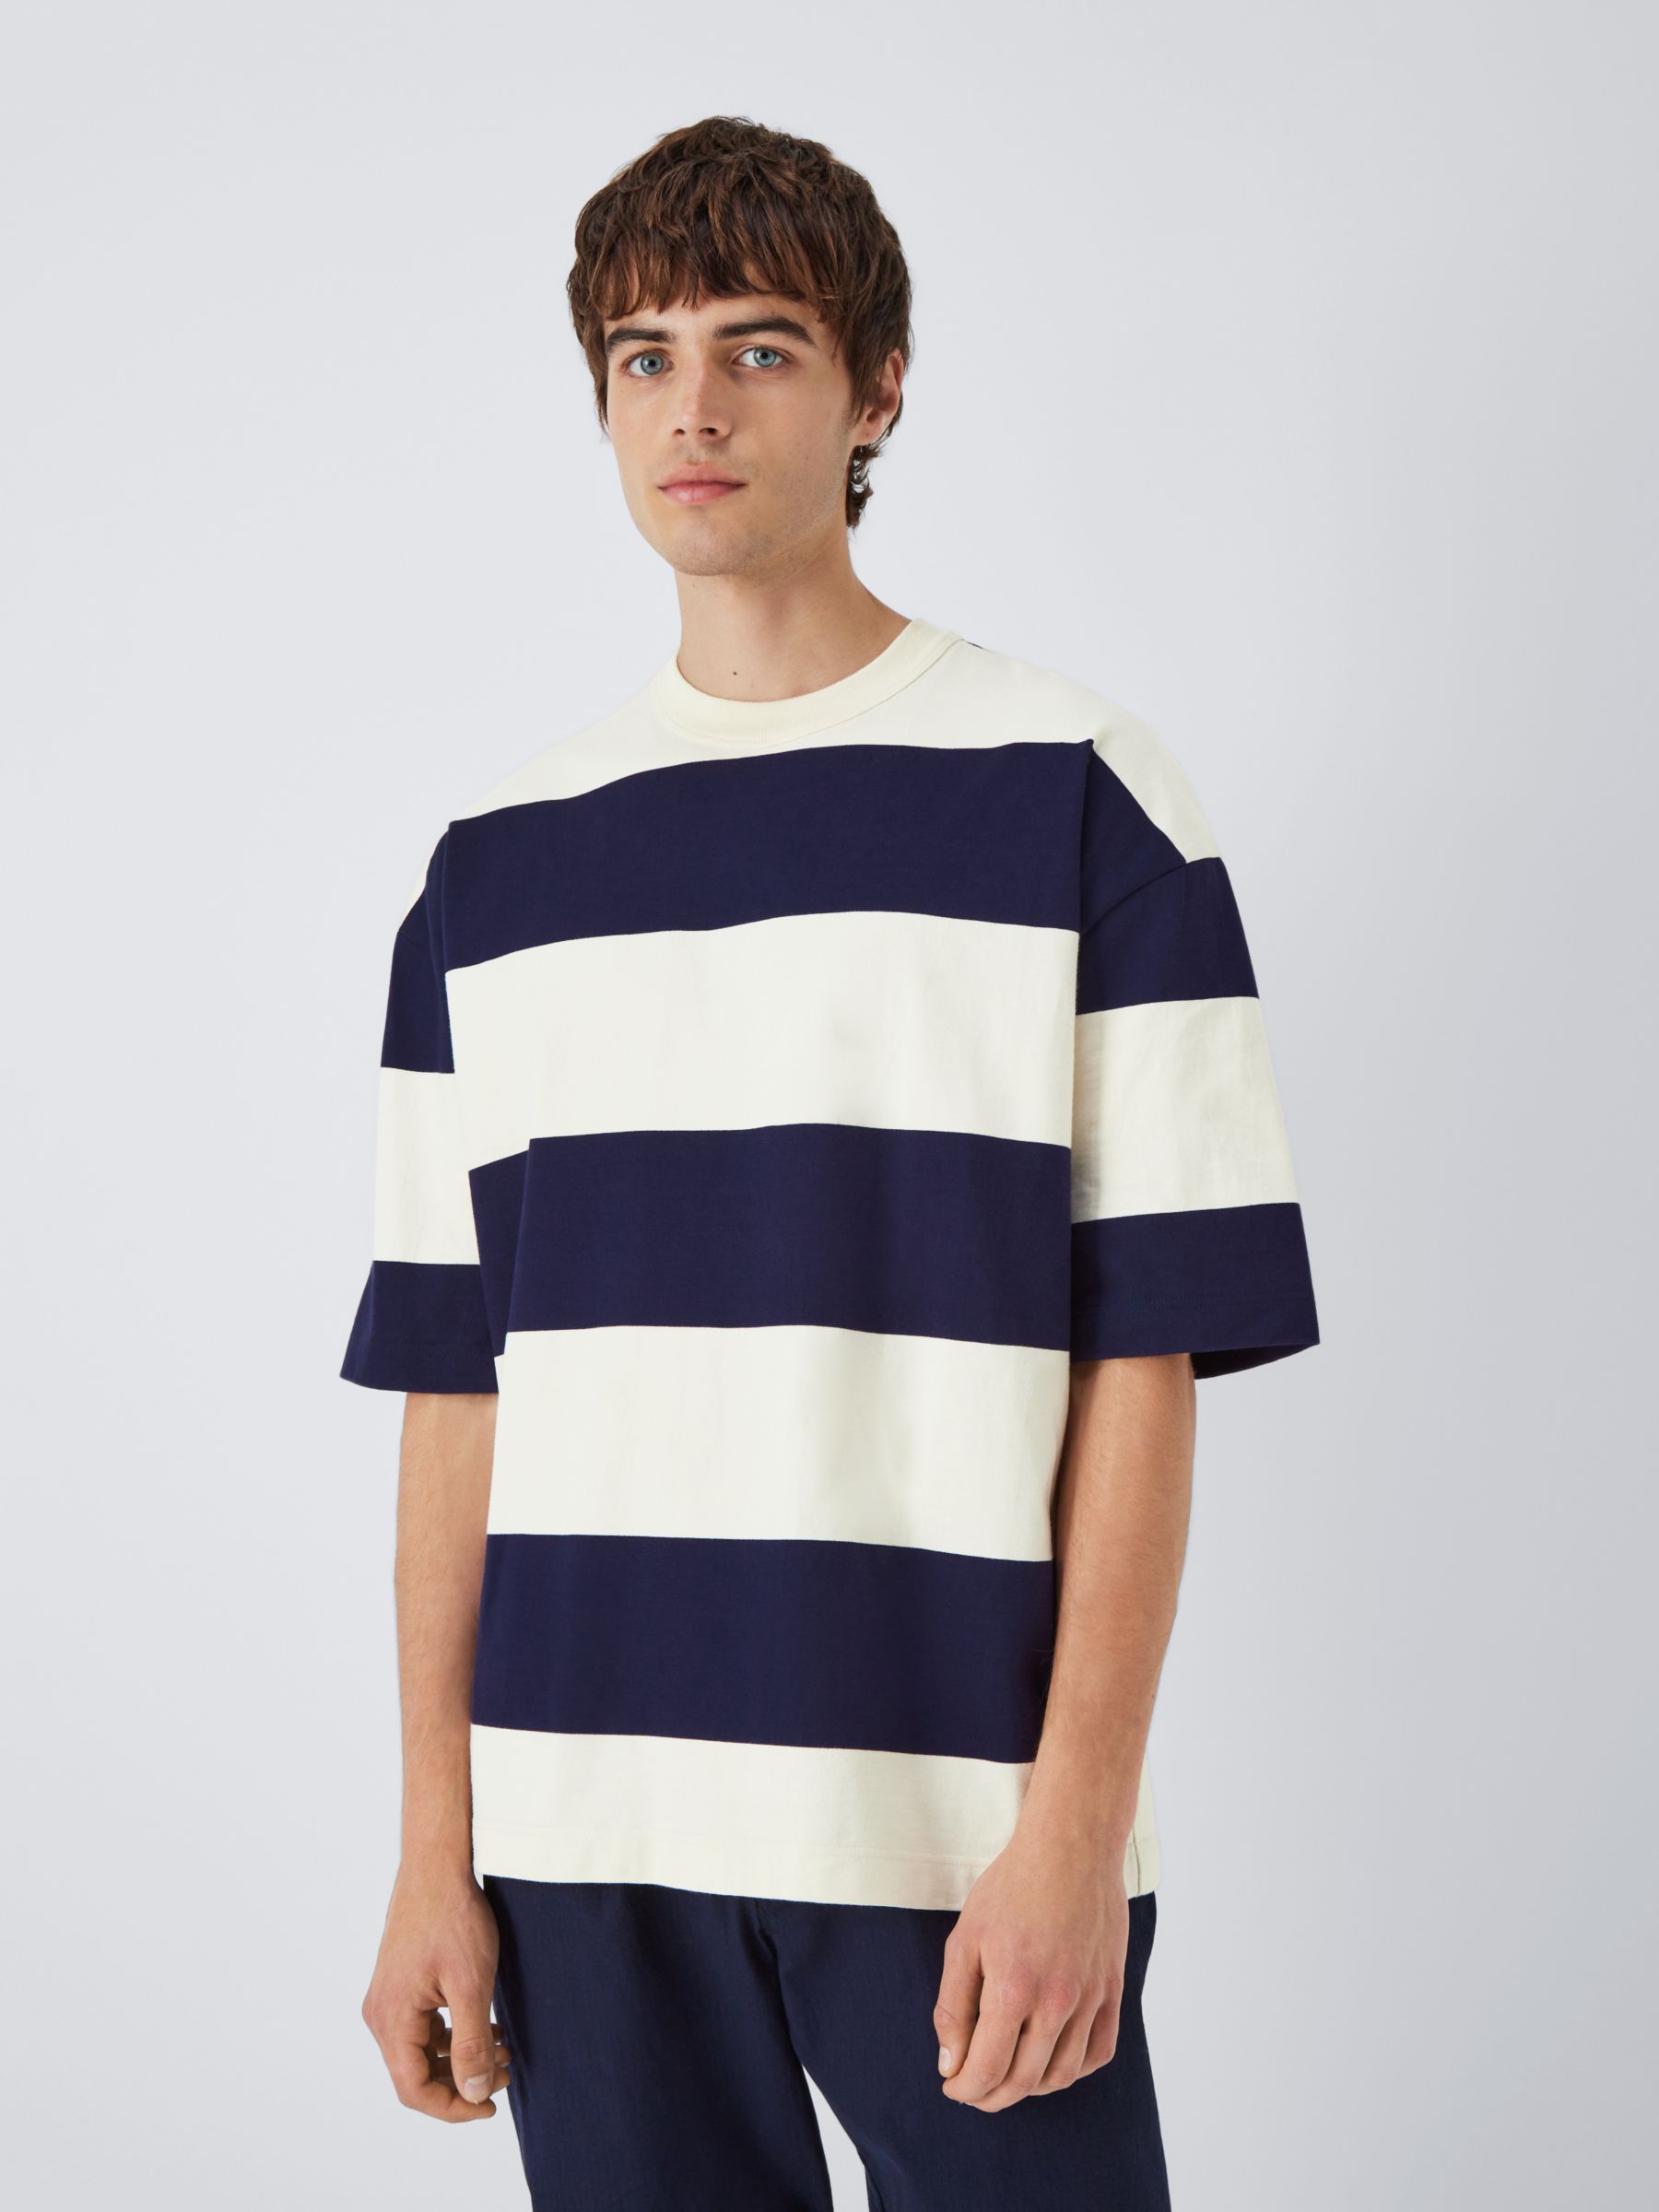 Armor Lux Striped Short Sleeve T-Shirt, White/Navy at John Lewis & Partners